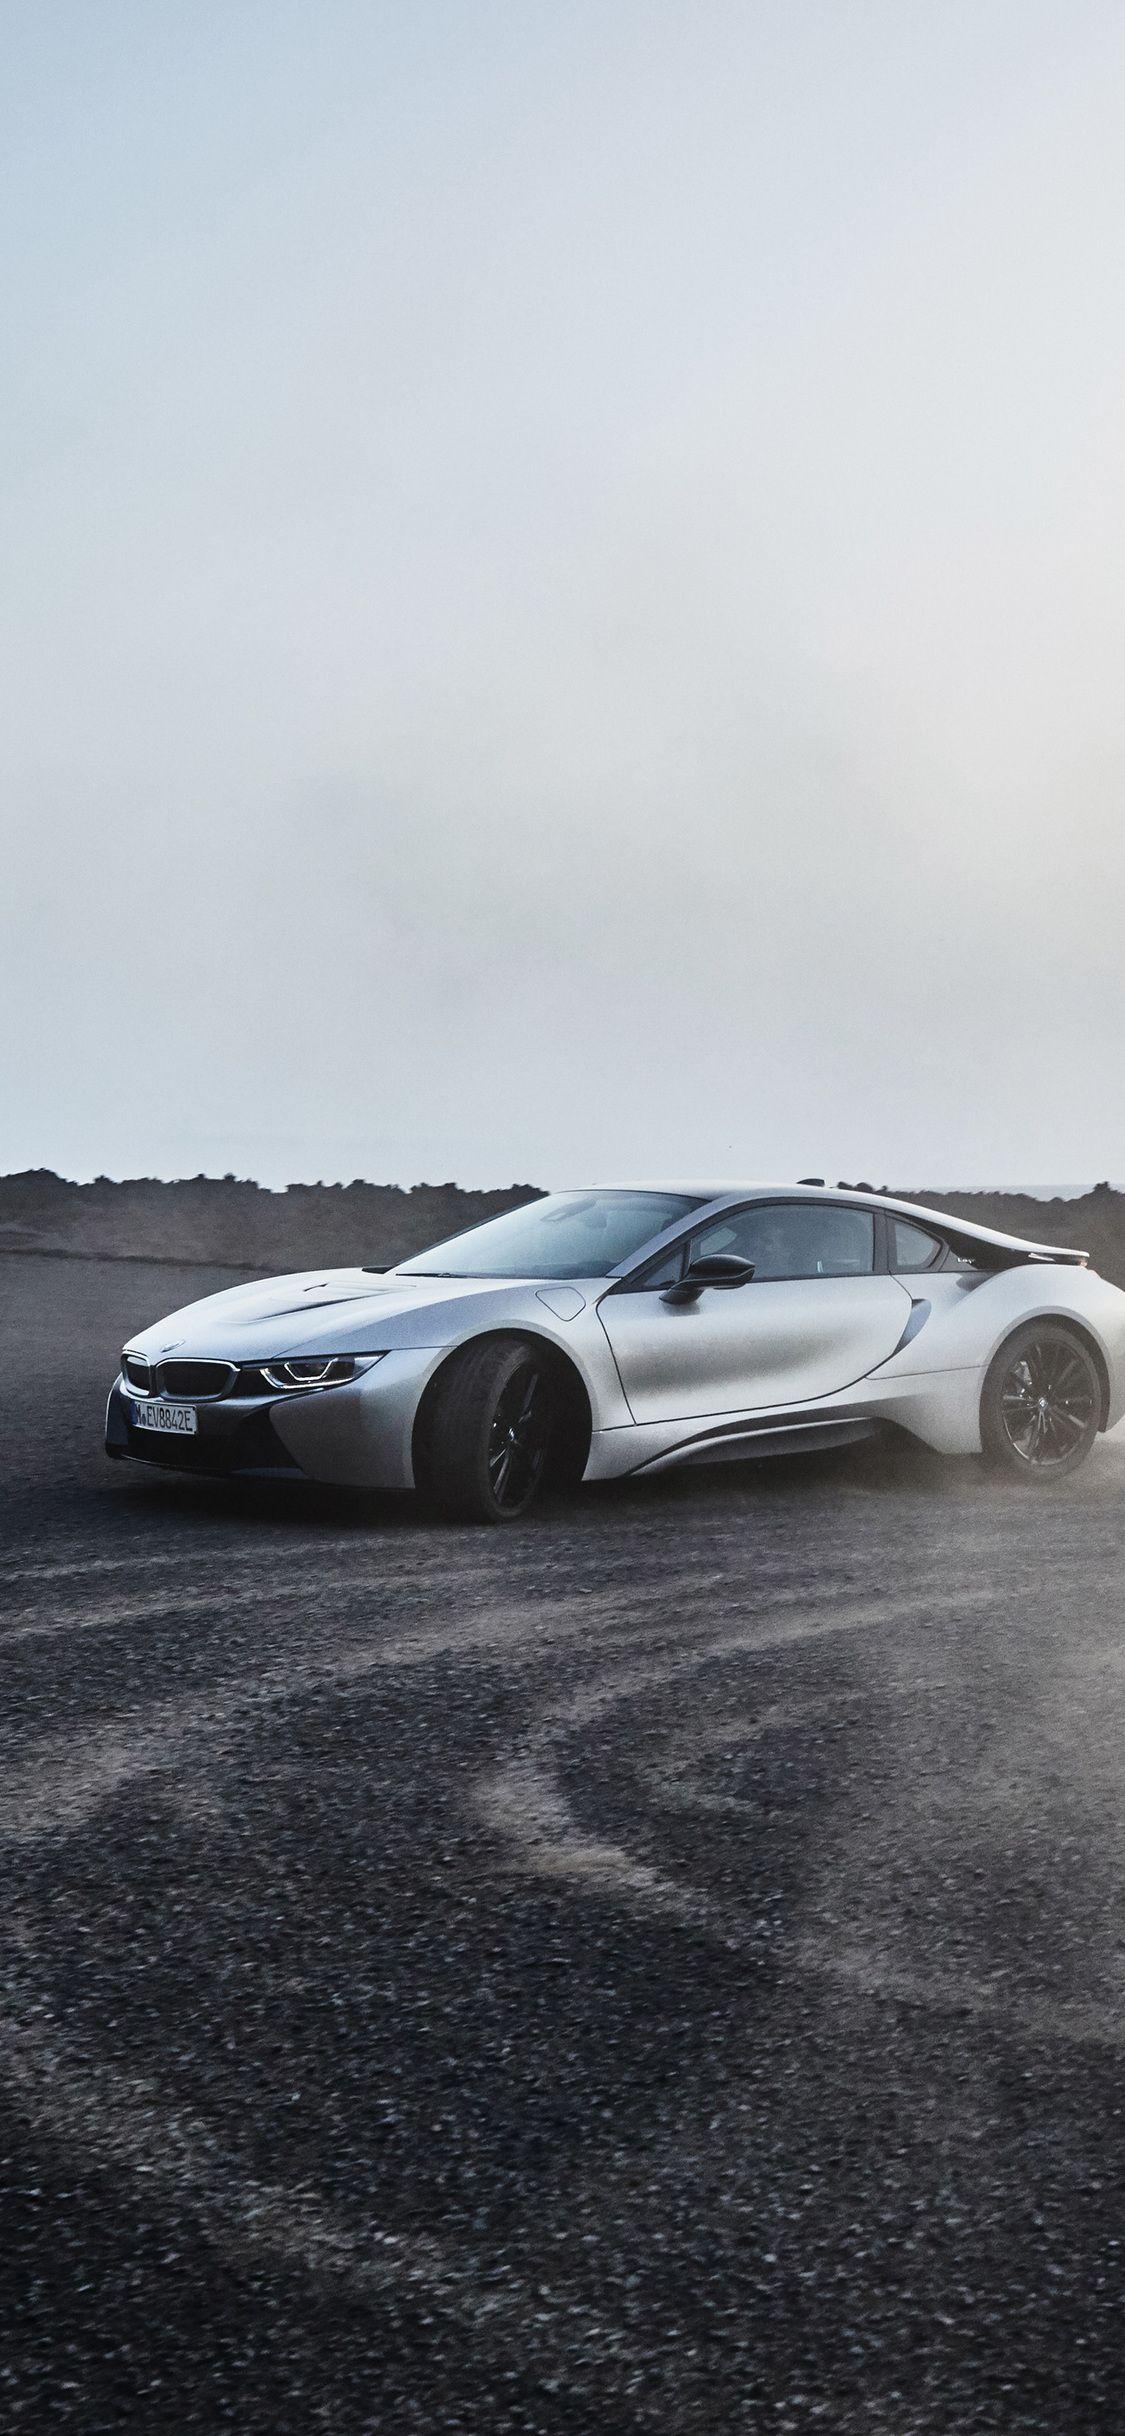 BMW I8 Coupe 2018 iPhone X, iPhone 10 HD 4k Wallpaper